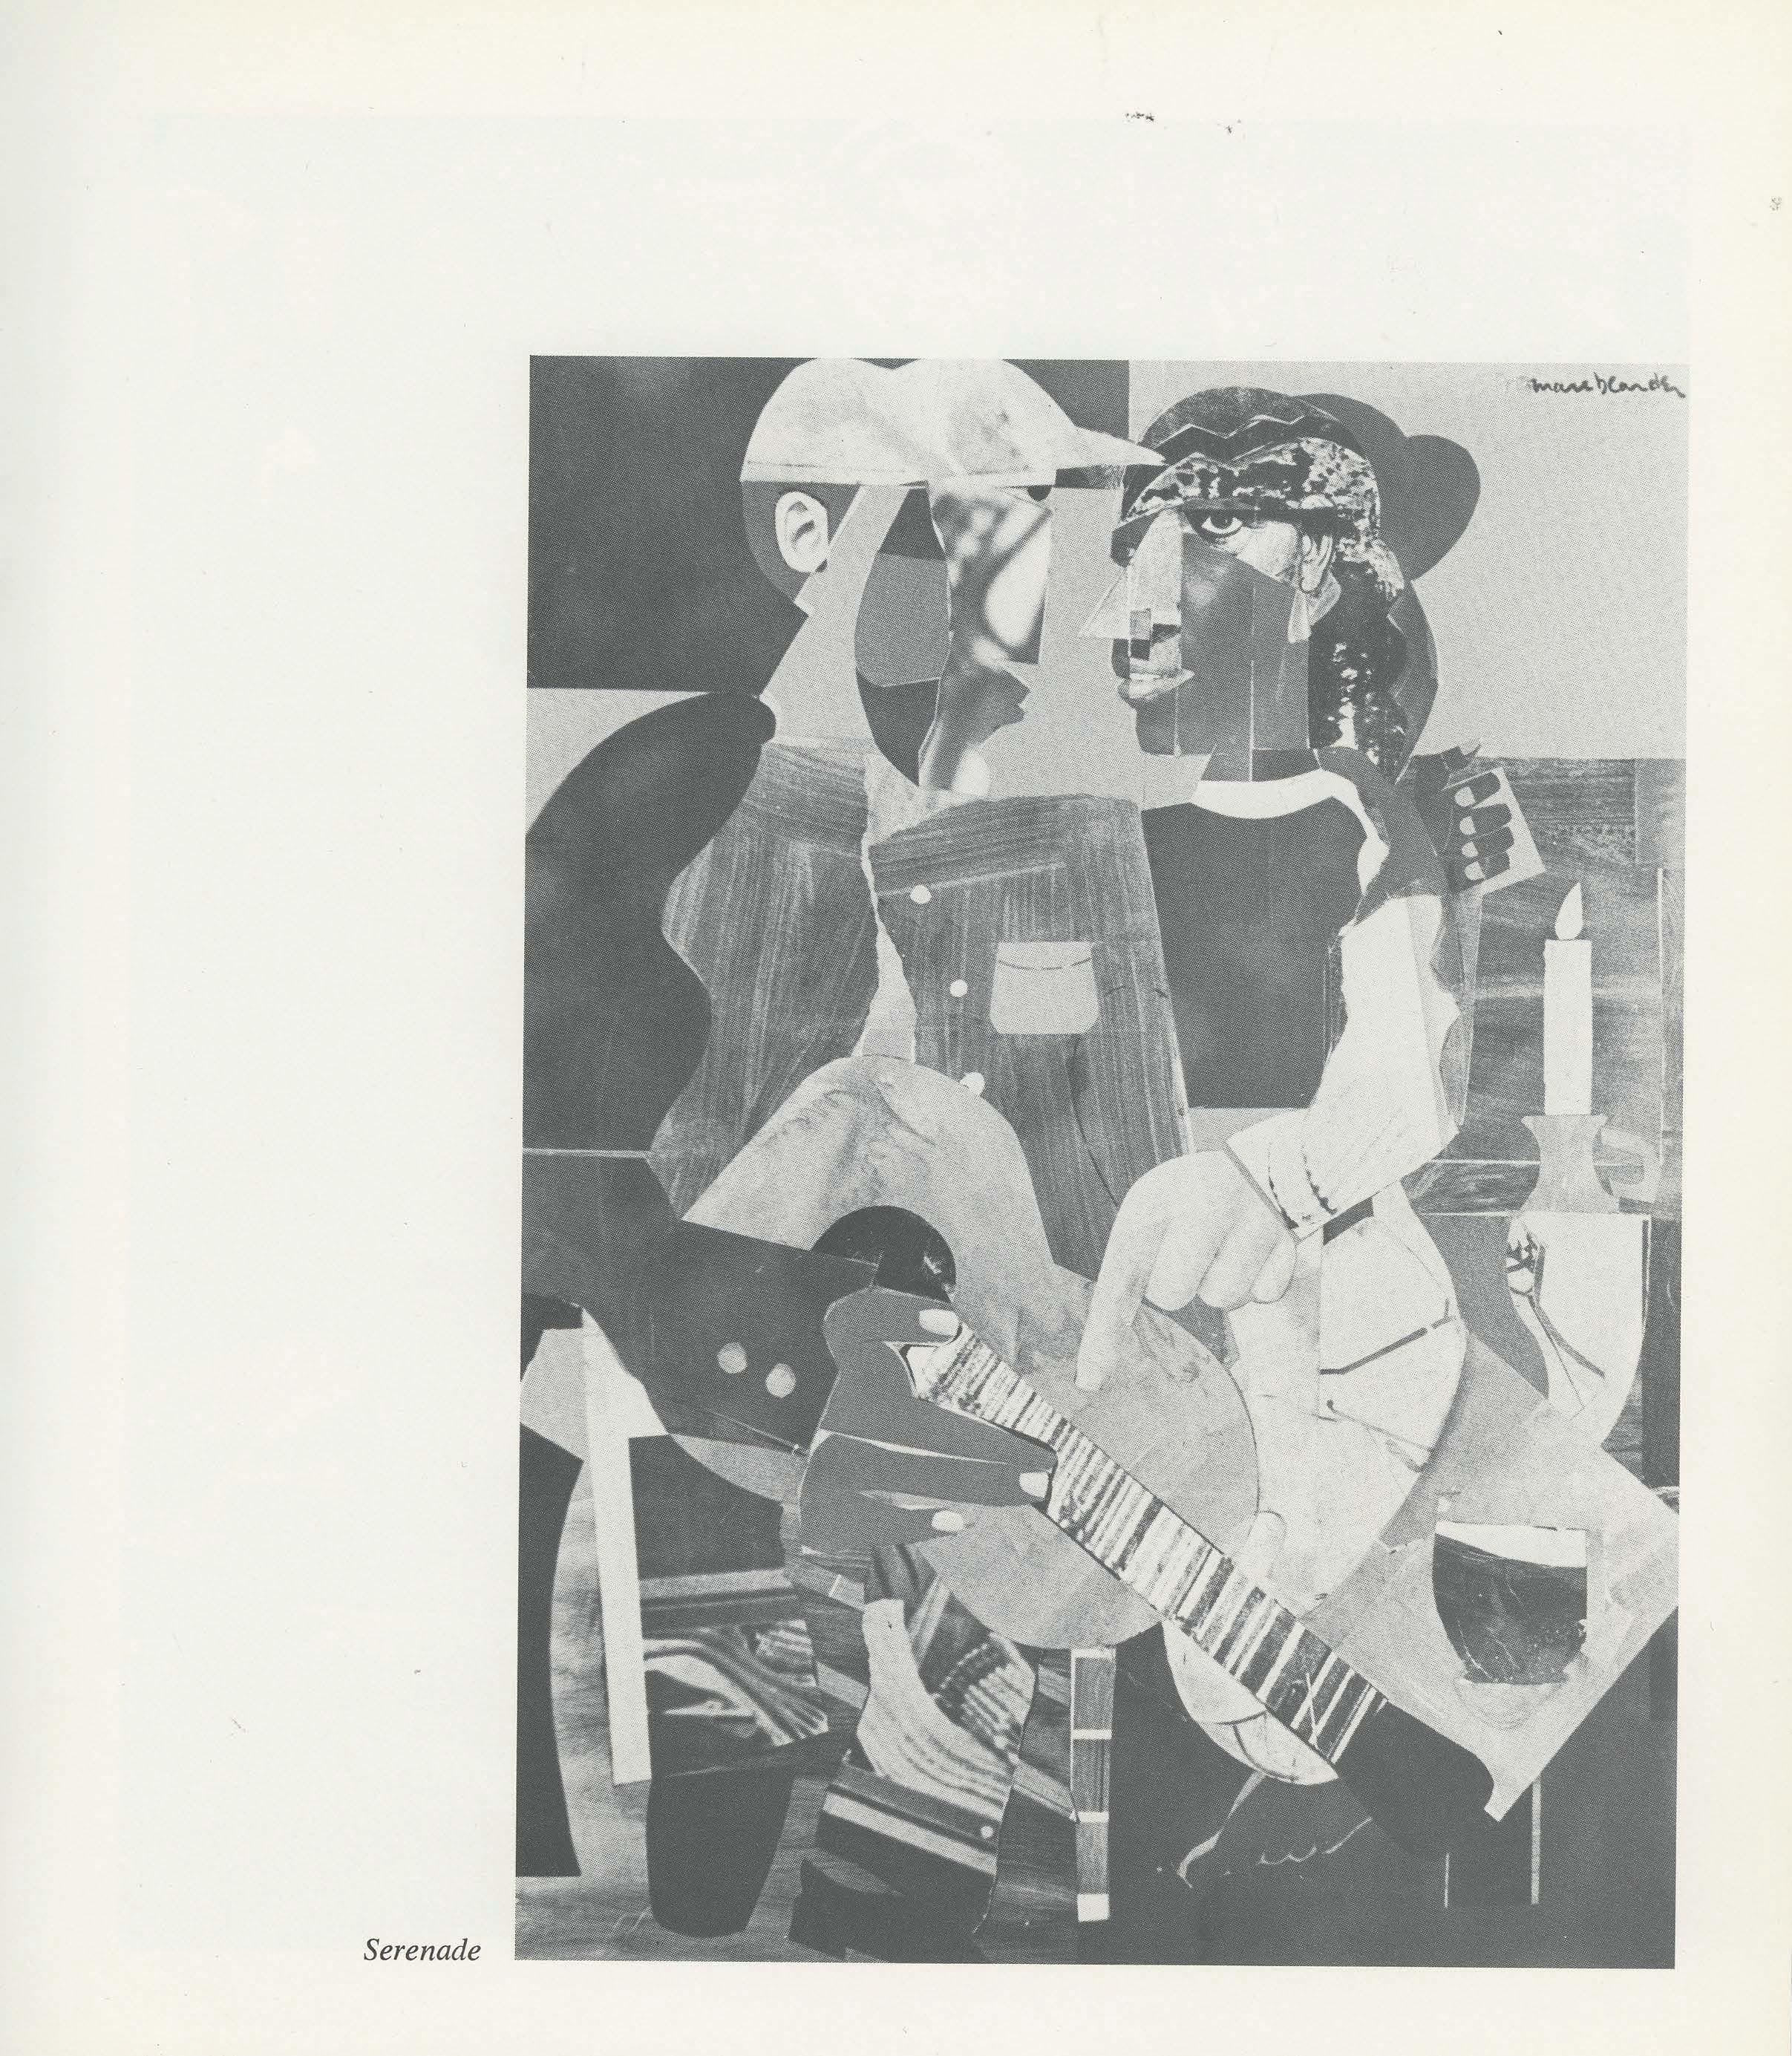 Scan of the cataolog 'Romare Bearden, Paintings and Projects' 